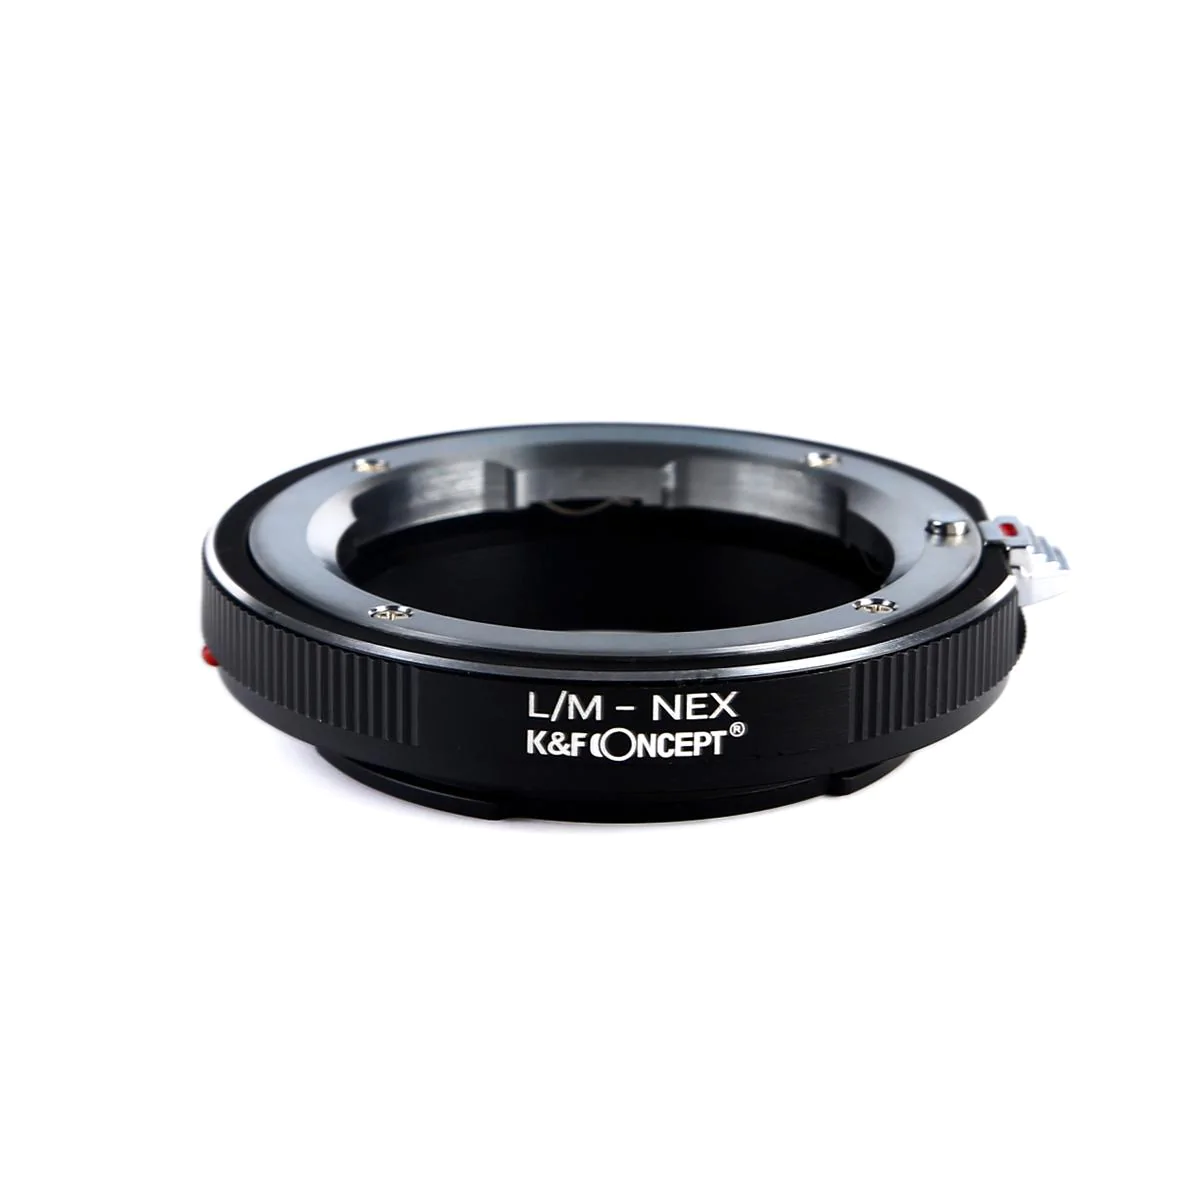 K&F Leica M Lenses to Sony E Mount Camera Adapter K&F Concept Lens Mount Adapter